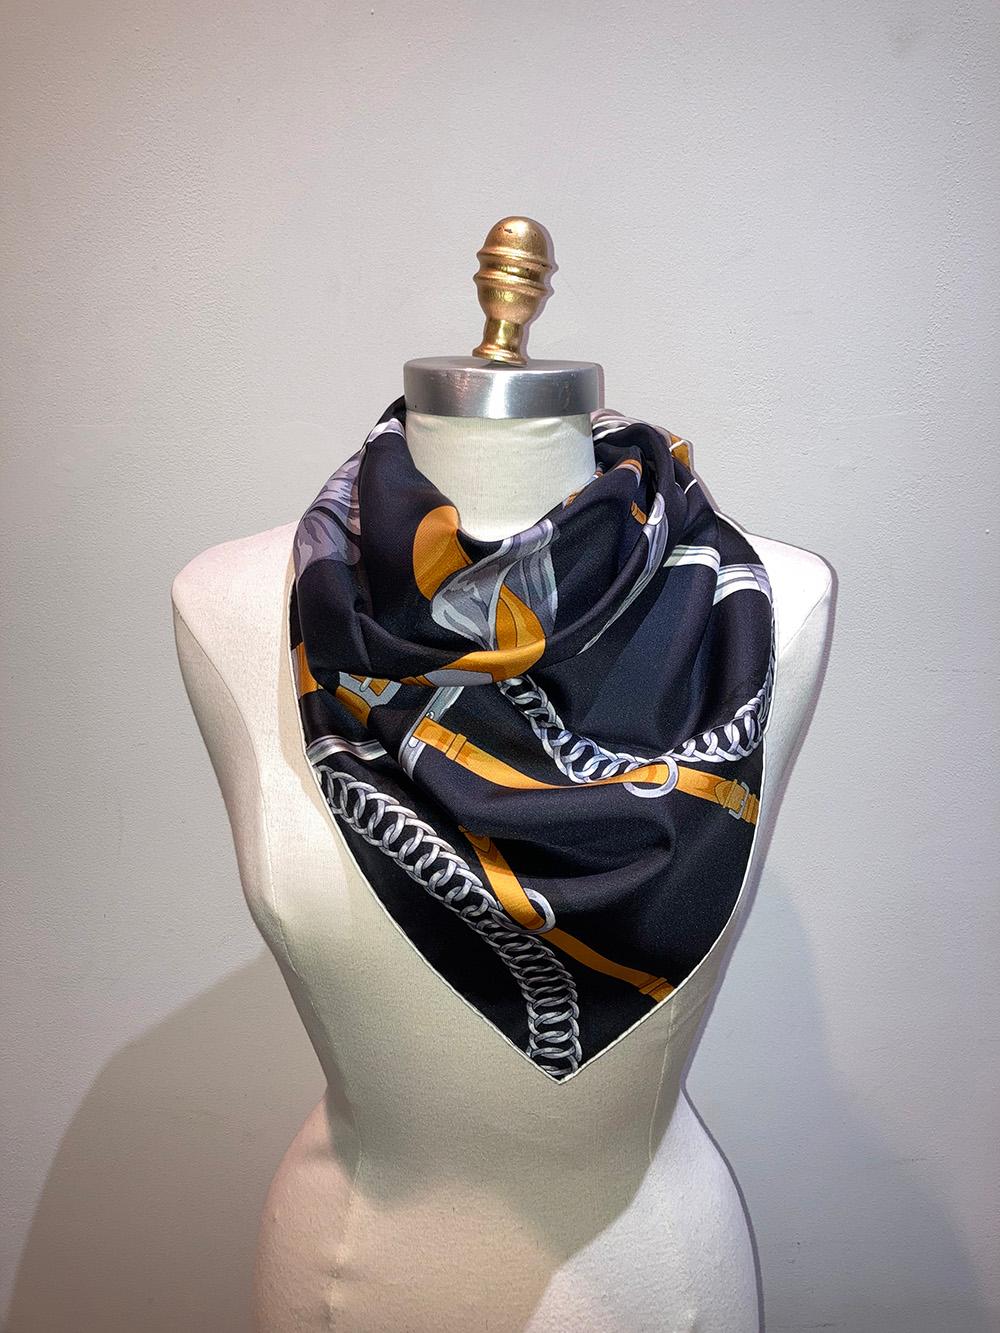 Hermes Grand Manege Detail Silk Scarf in excellent condition. Original silk screen design c2018 by Henri d'Origny features black, gold, beige, cream and grey equestrian bows, belts, buckles, bridles, and hardware print. 100% silk, hand rolled hem,